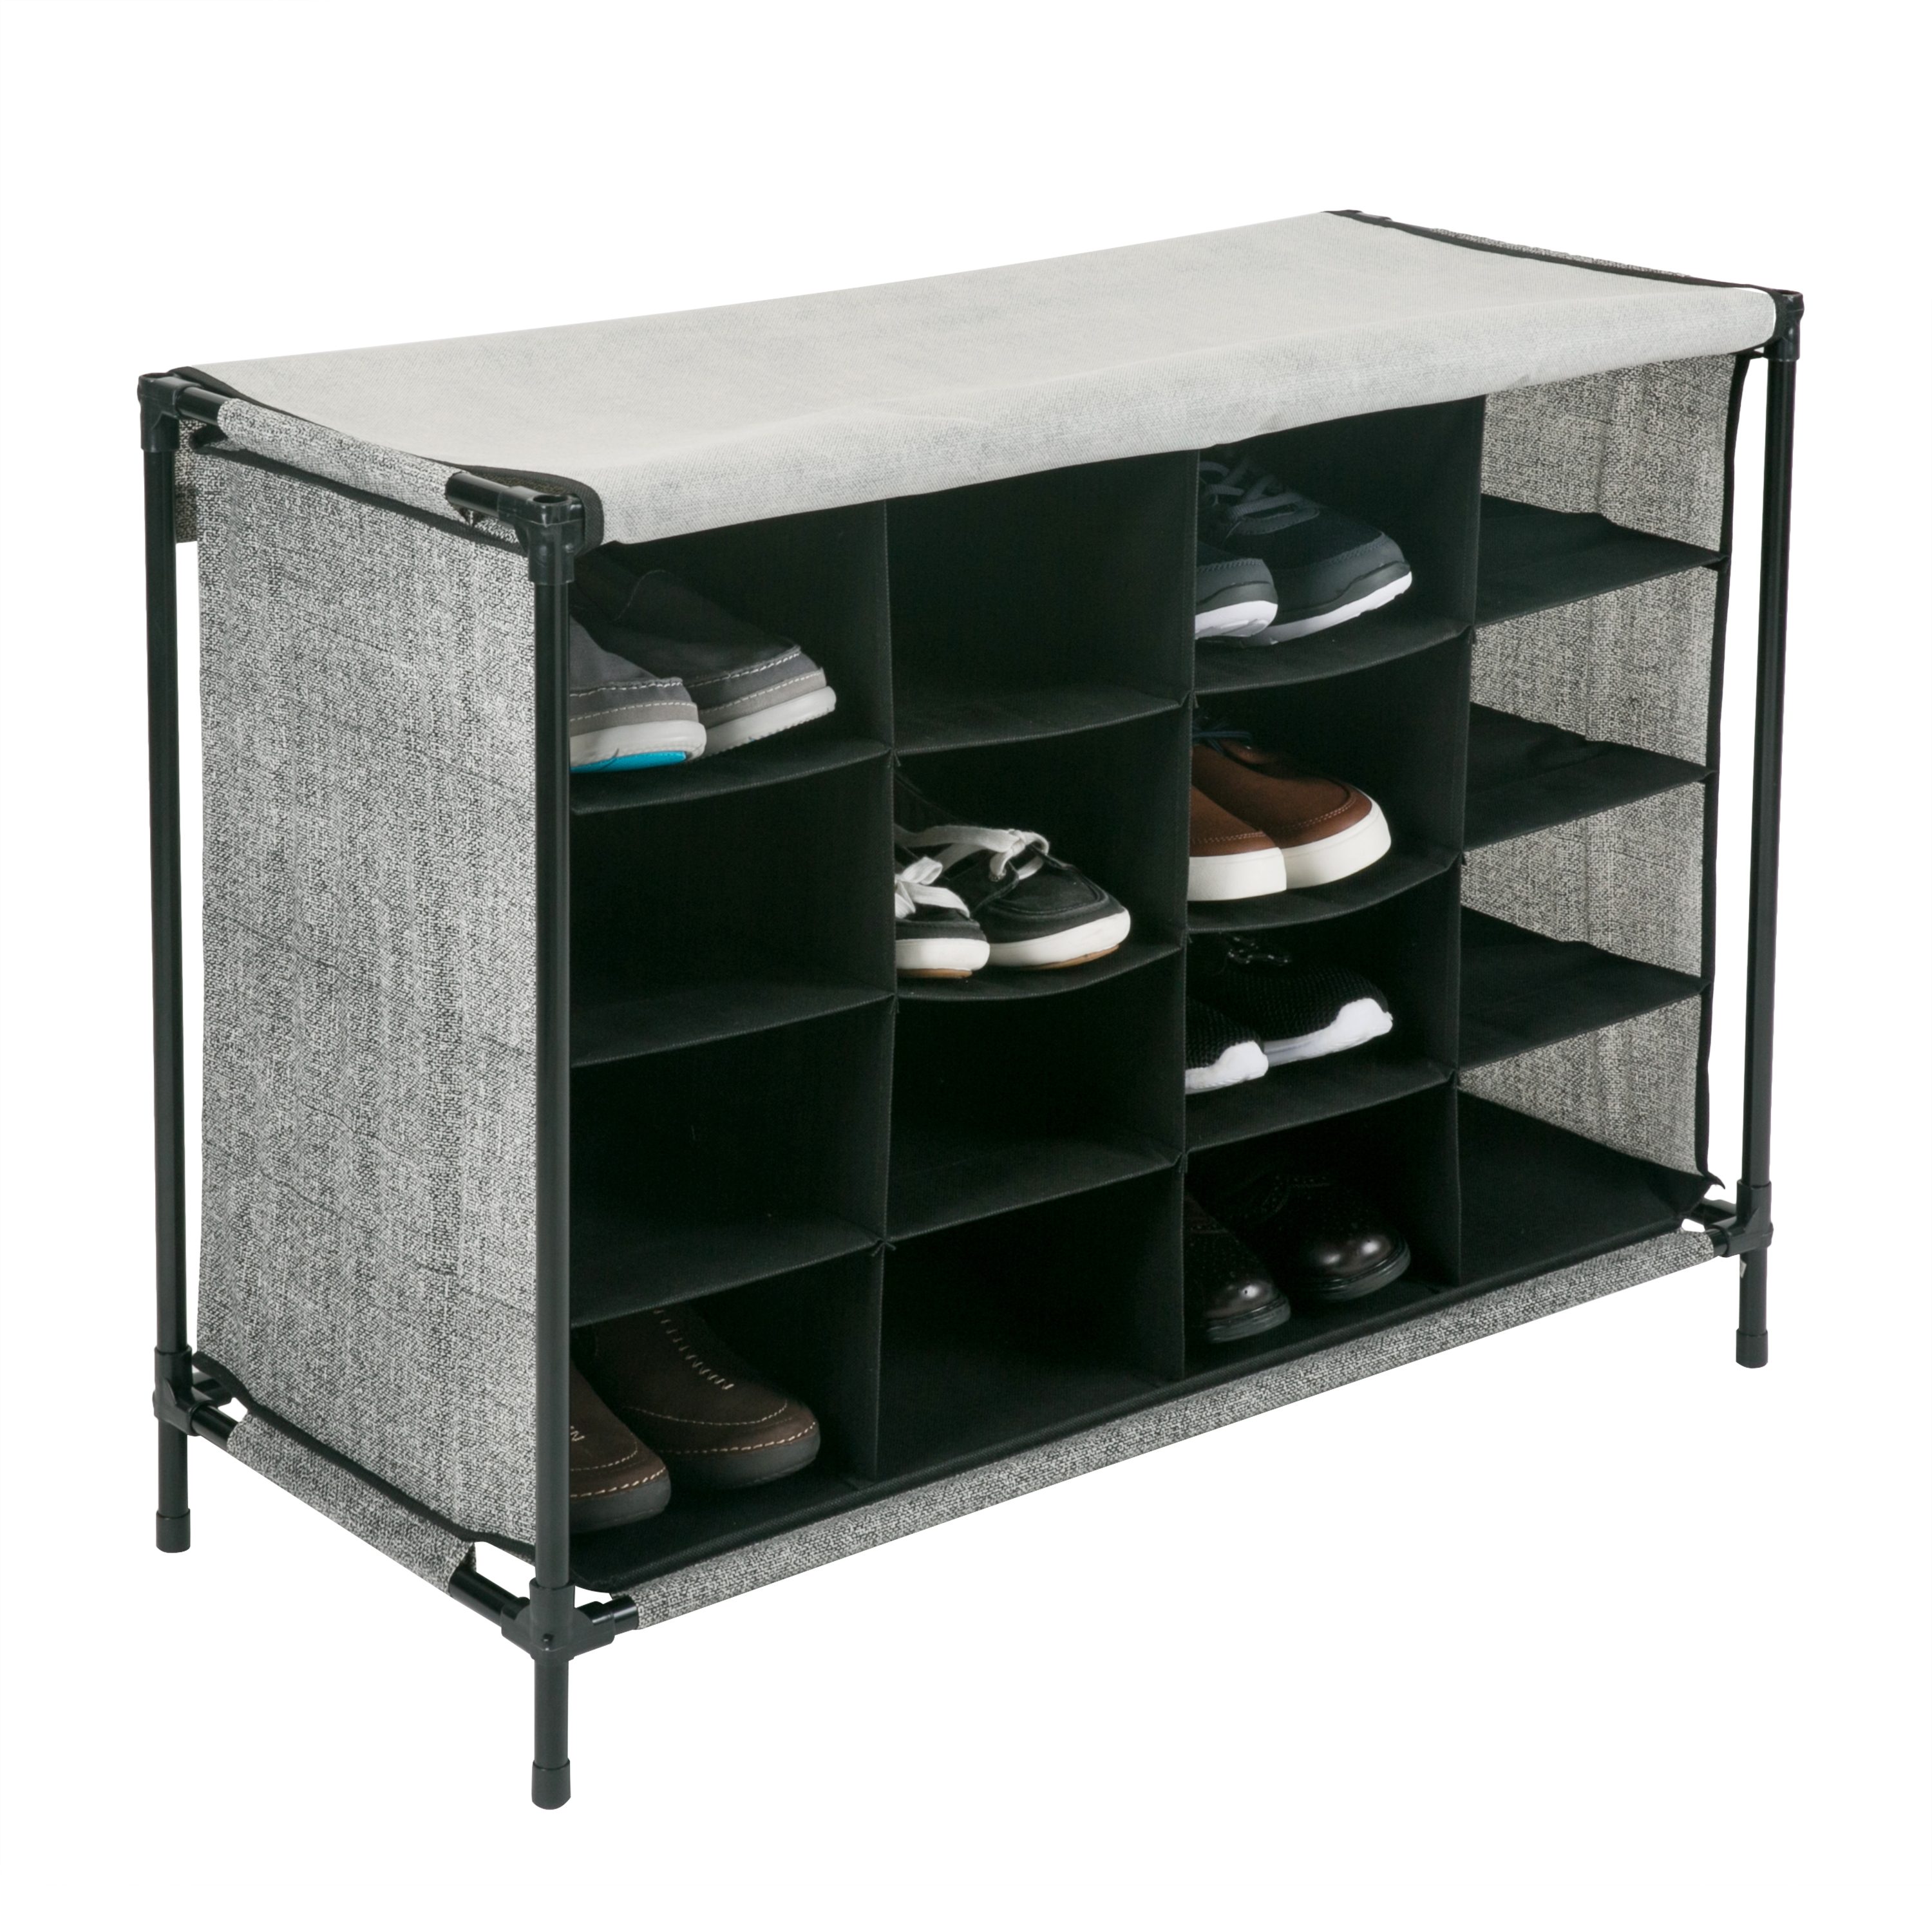 Simplify 16 Compartment 4 Tier Fabric Shoe Cubby in Black - image 1 of 10